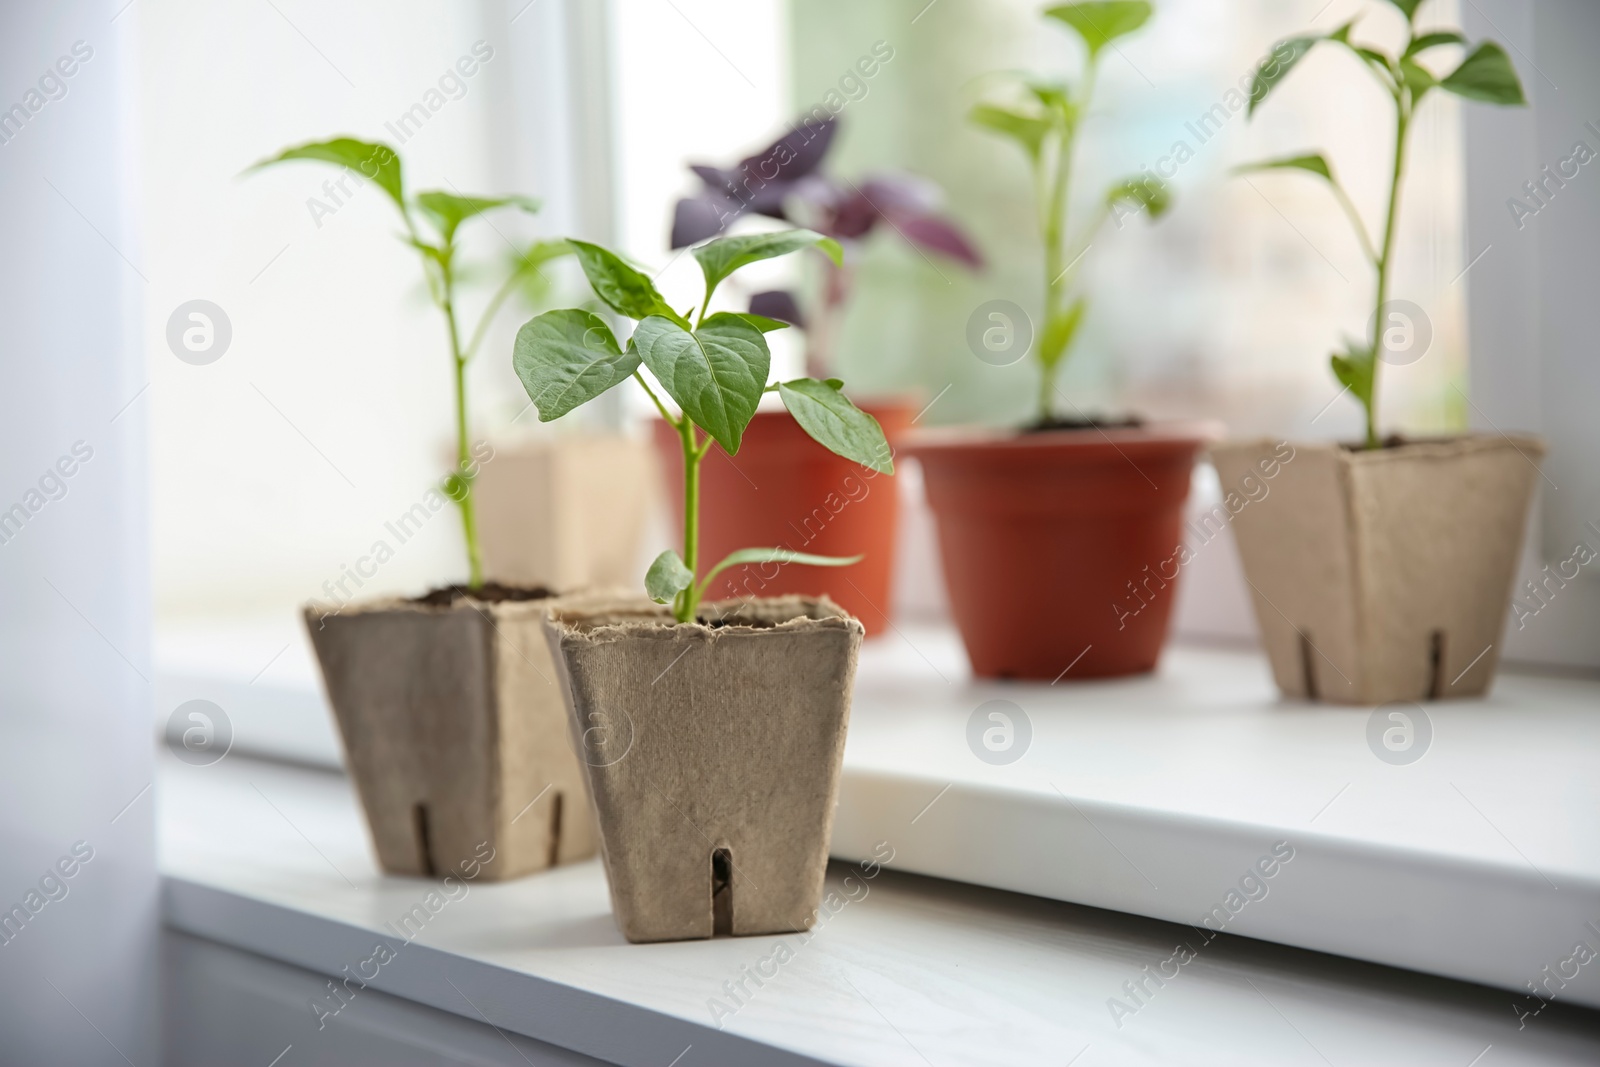 Photo of Green pepper seedlings in peat pots on window sill indoors